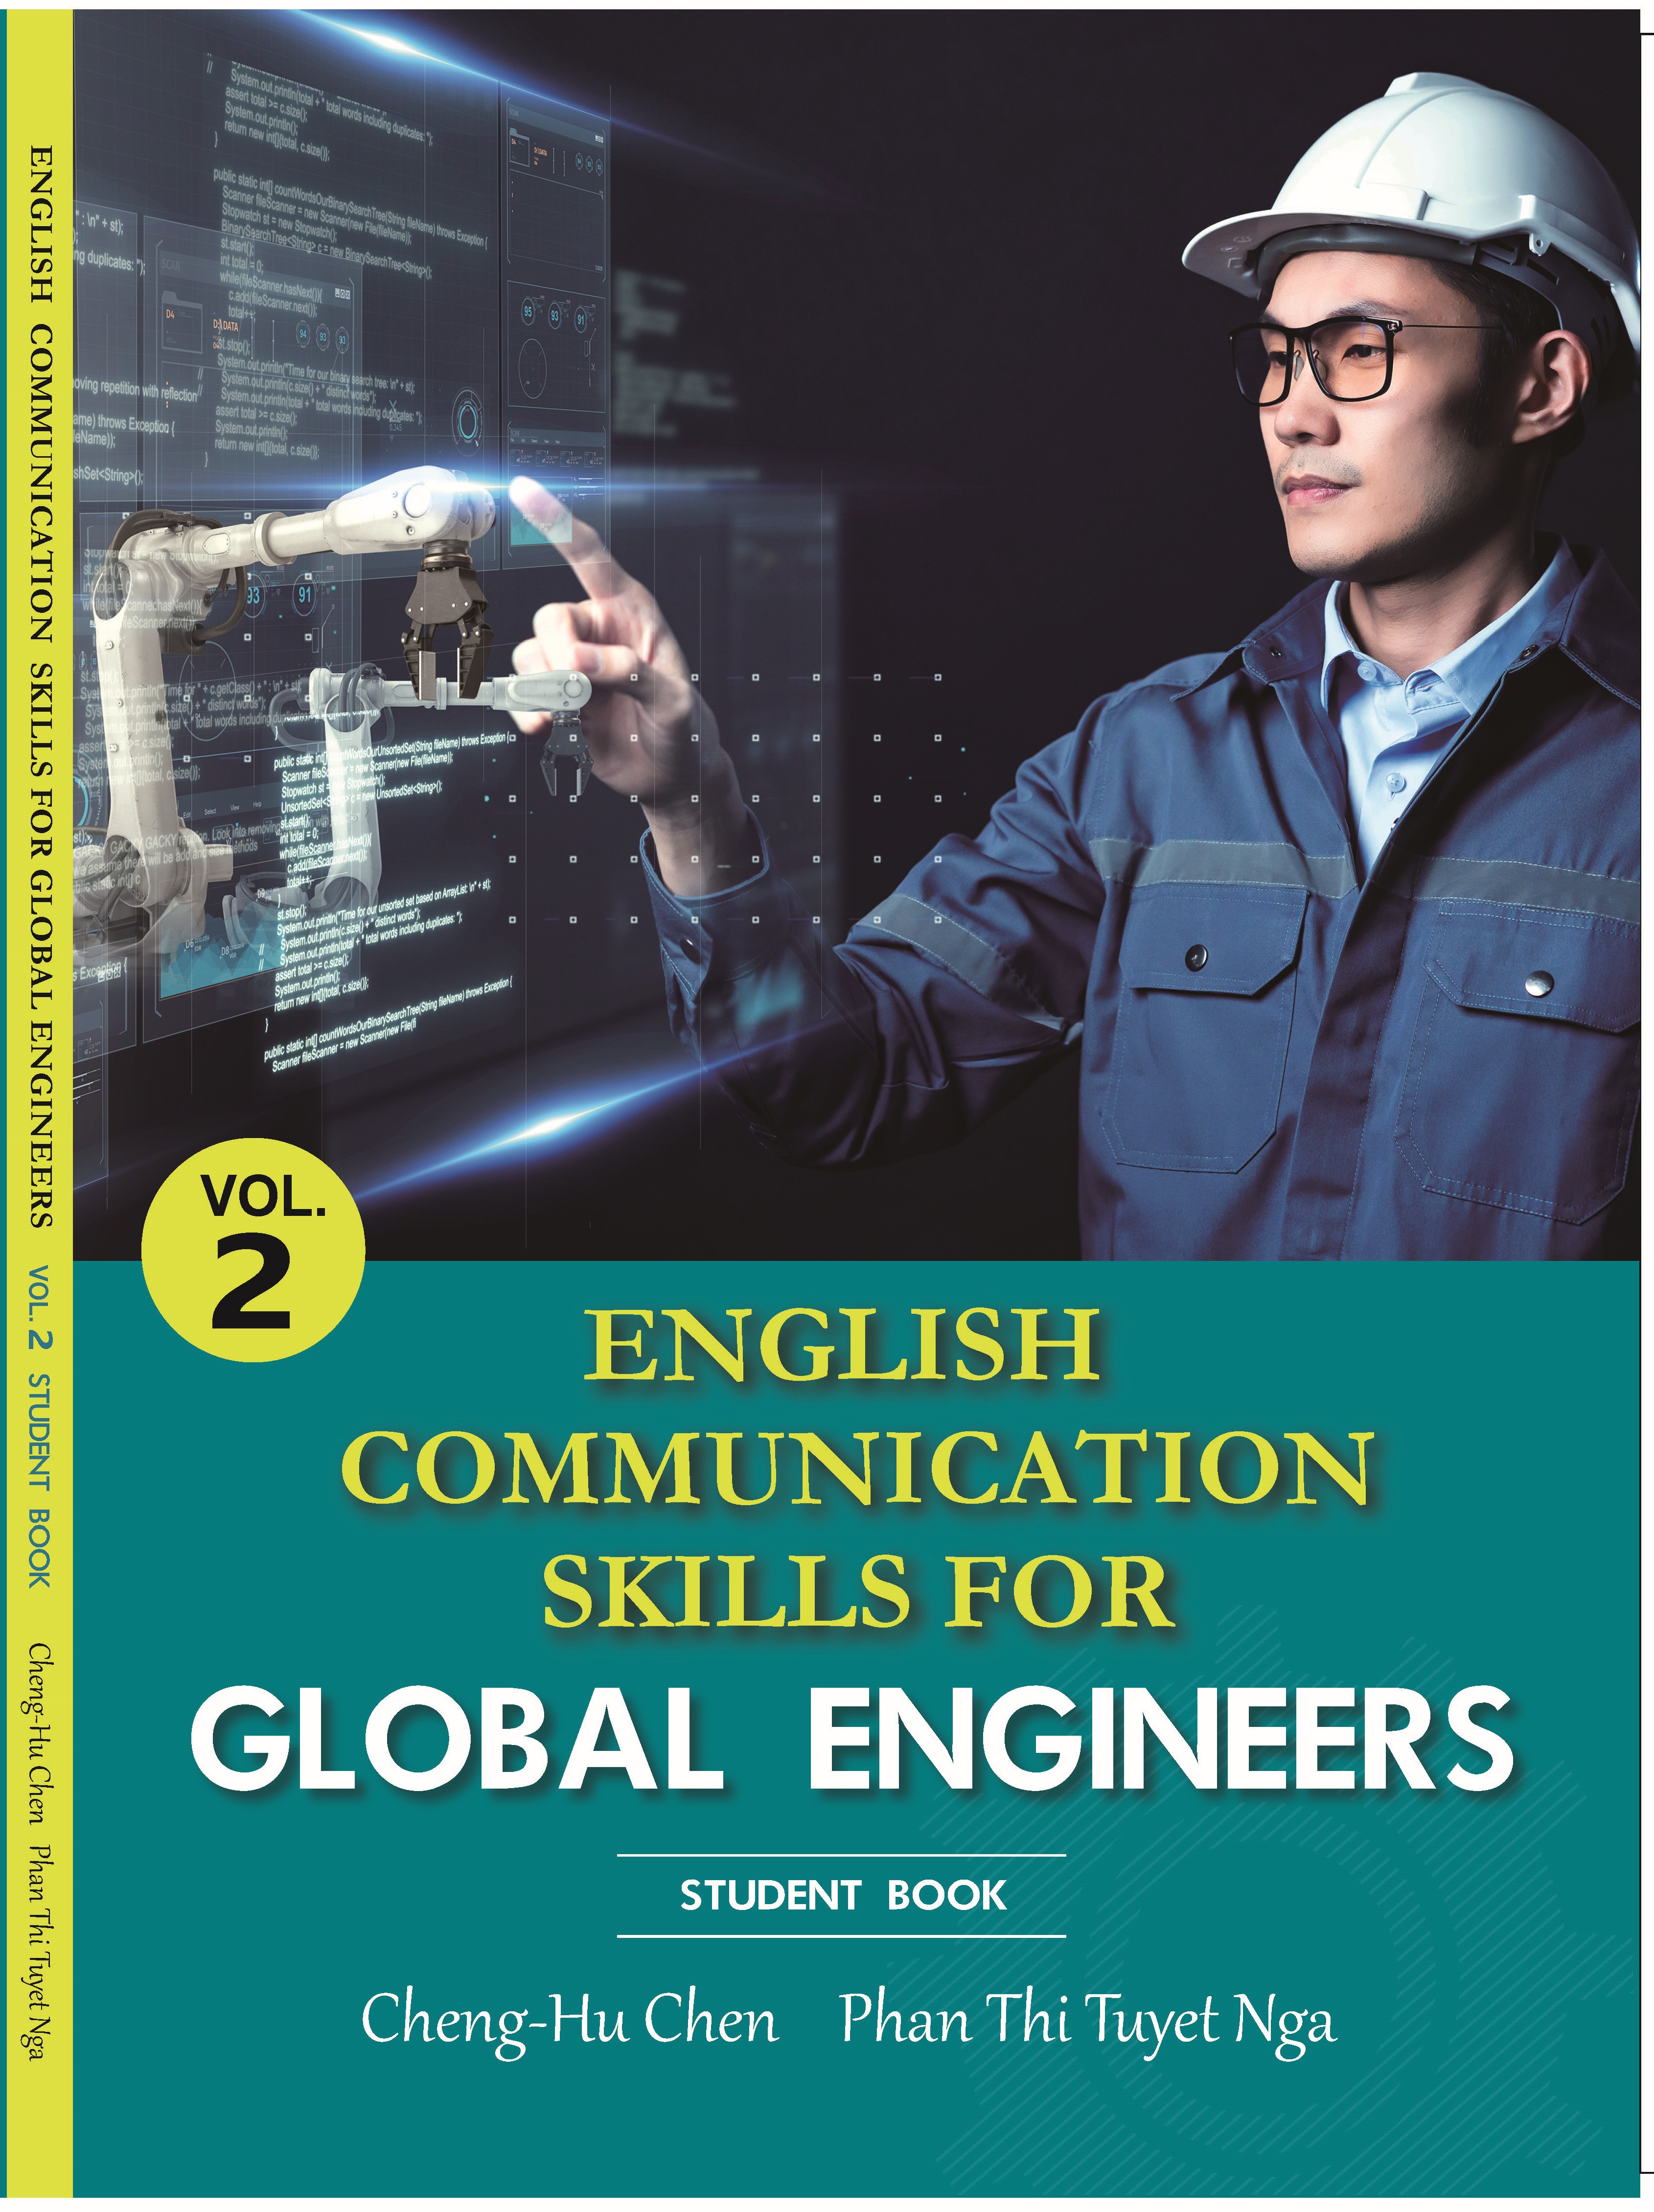 English communication skills for global engineers, Student book, Vol.2